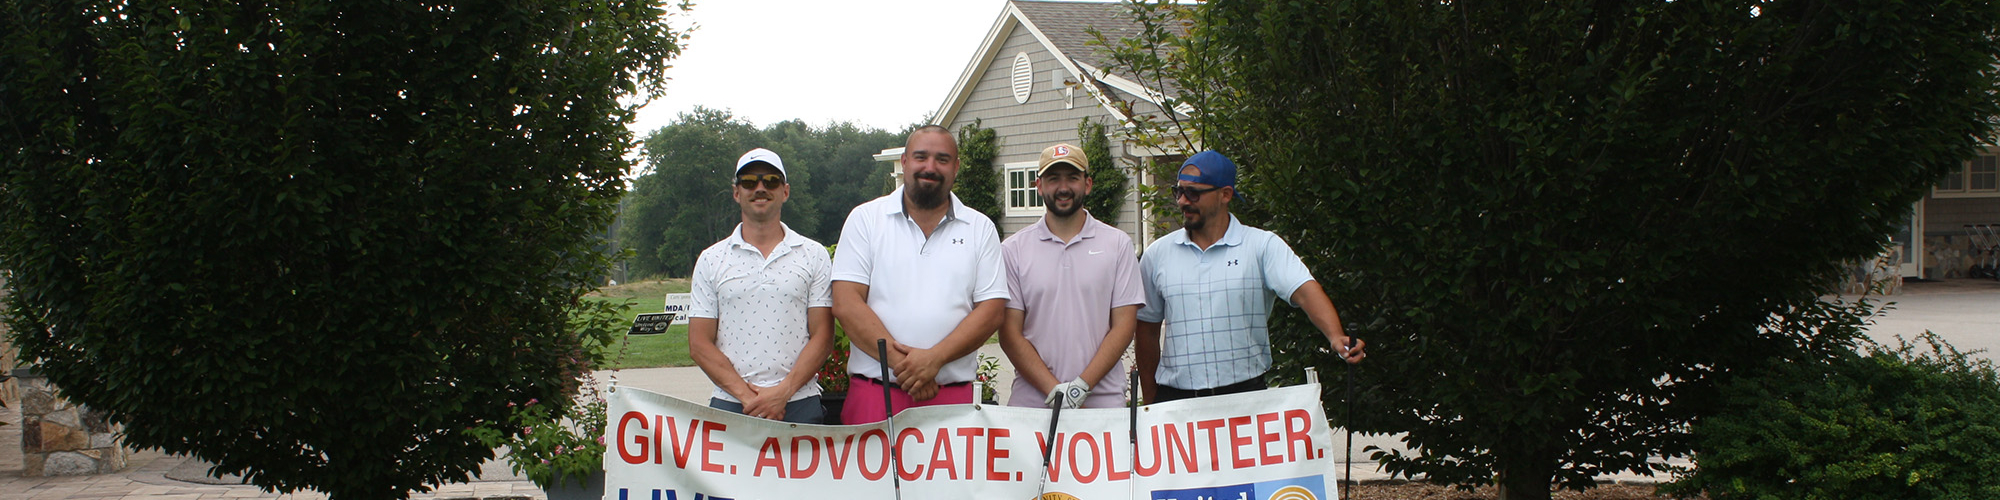 Golfers posing for a photo at last year's tournament